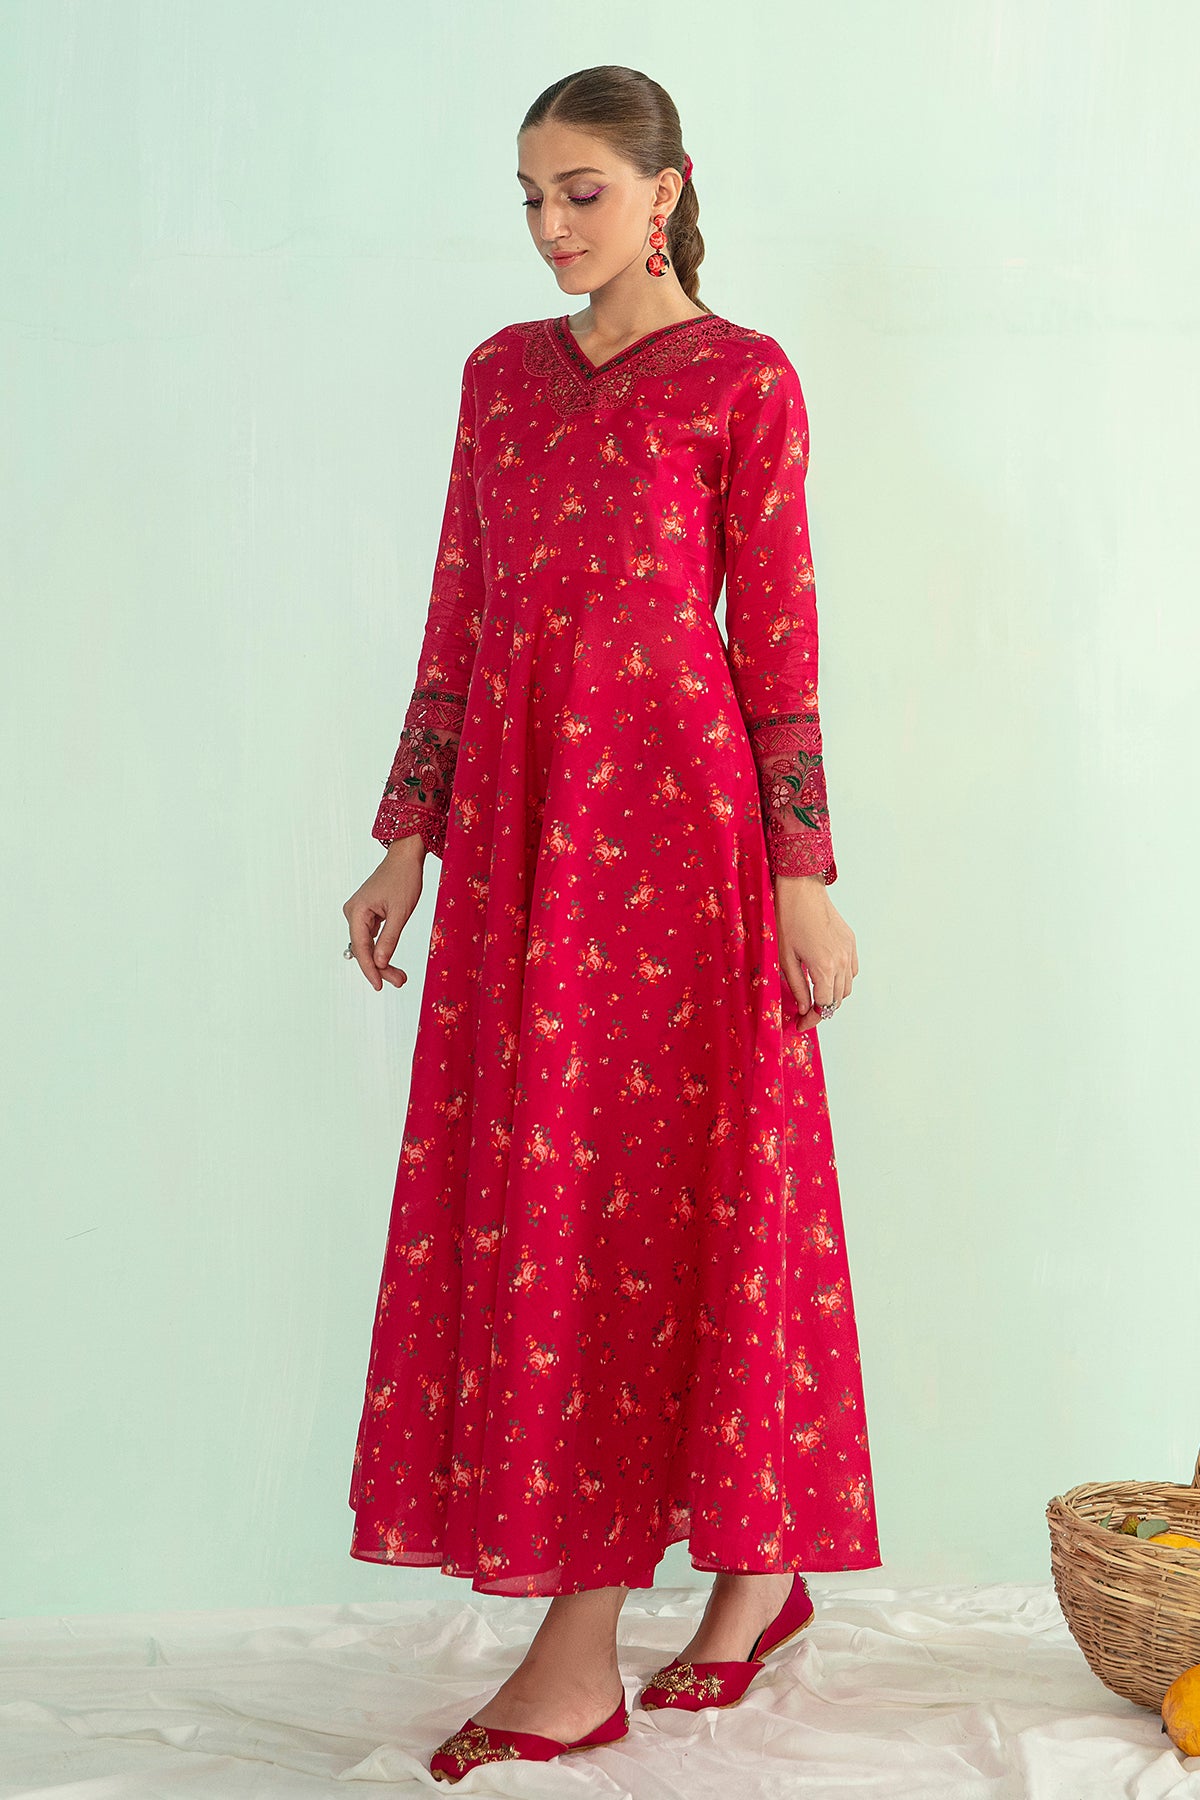 EMBROIDERED LAWN PR-837